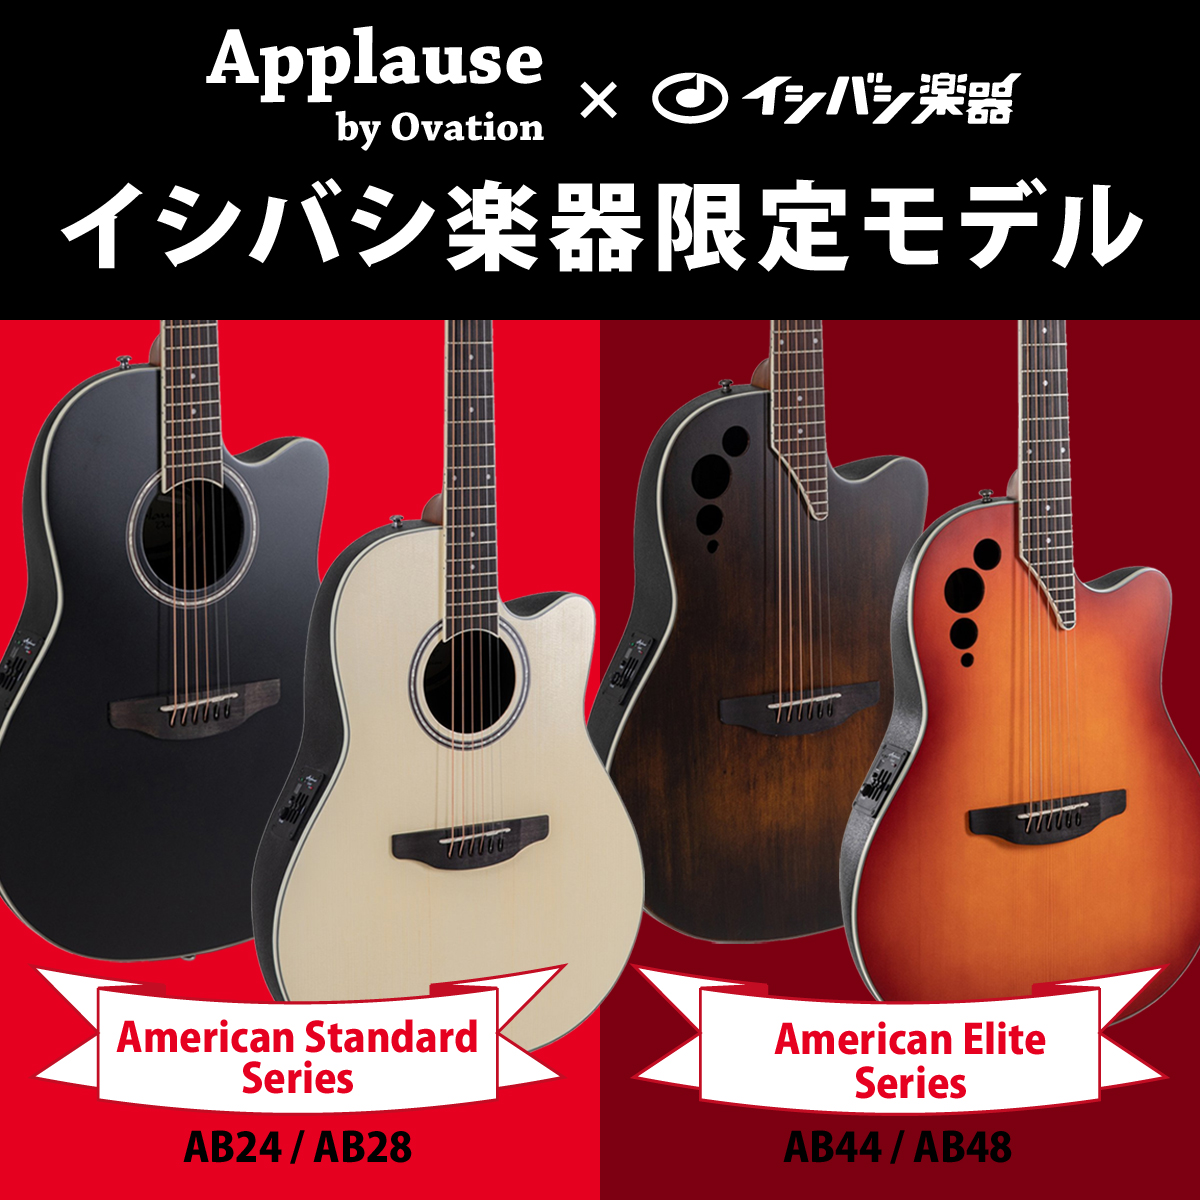 Applause by Ovation」からイシバシ楽器限定モデルが登場 